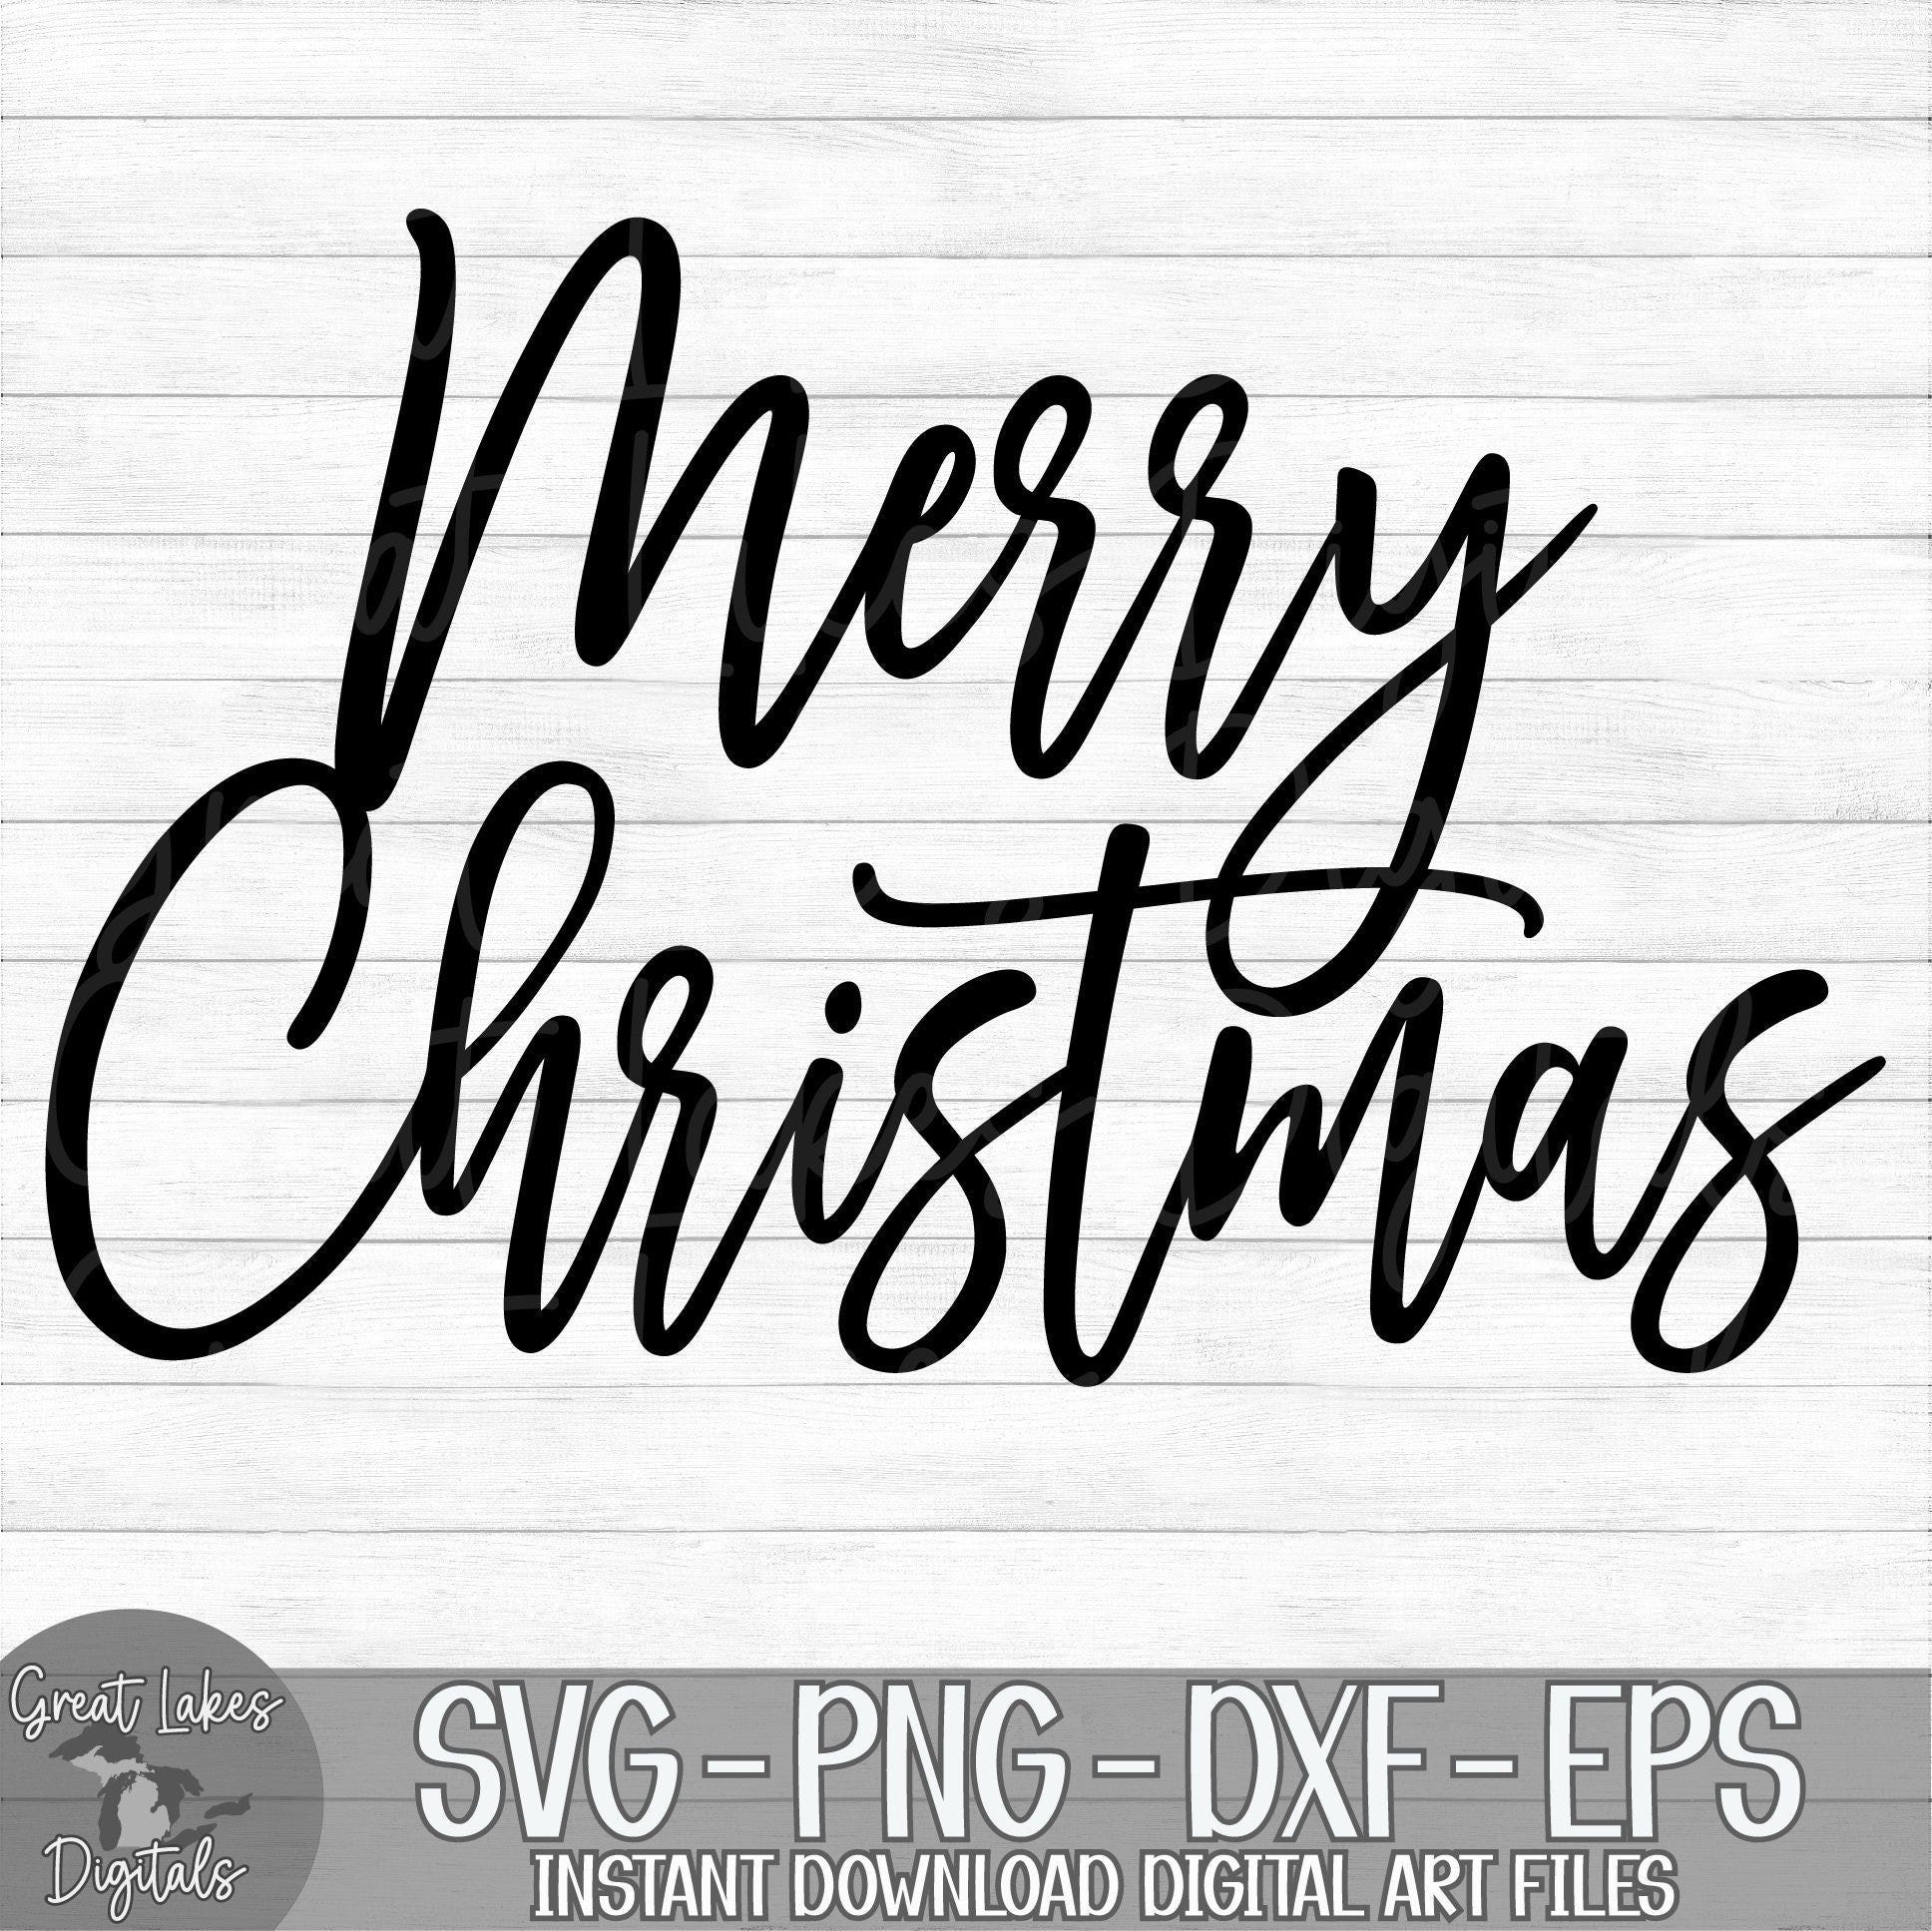 Merry Christmas - Instant Digital Download - svg, png, dxf, and eps files included!